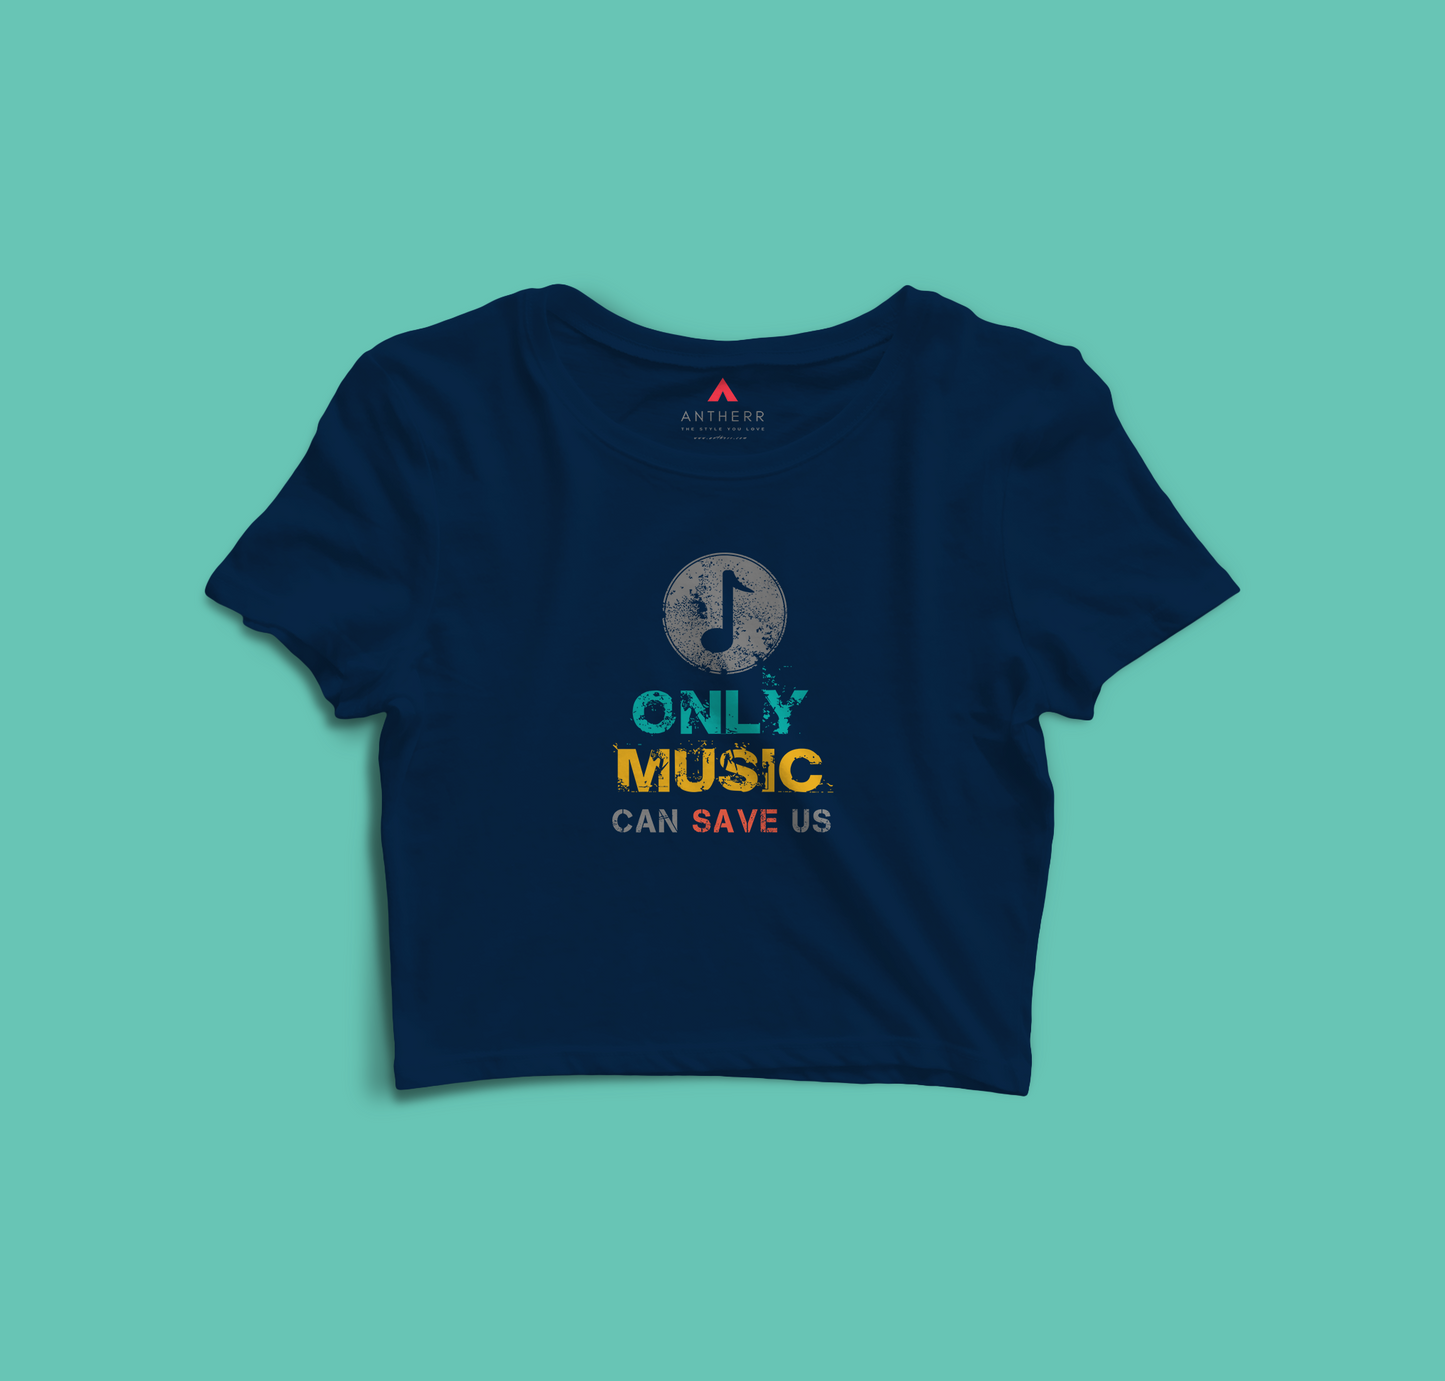 "ONLY MUSIC CAN SAVE US" - HALF-SLEEVE CROP TOP NAVY BLUE